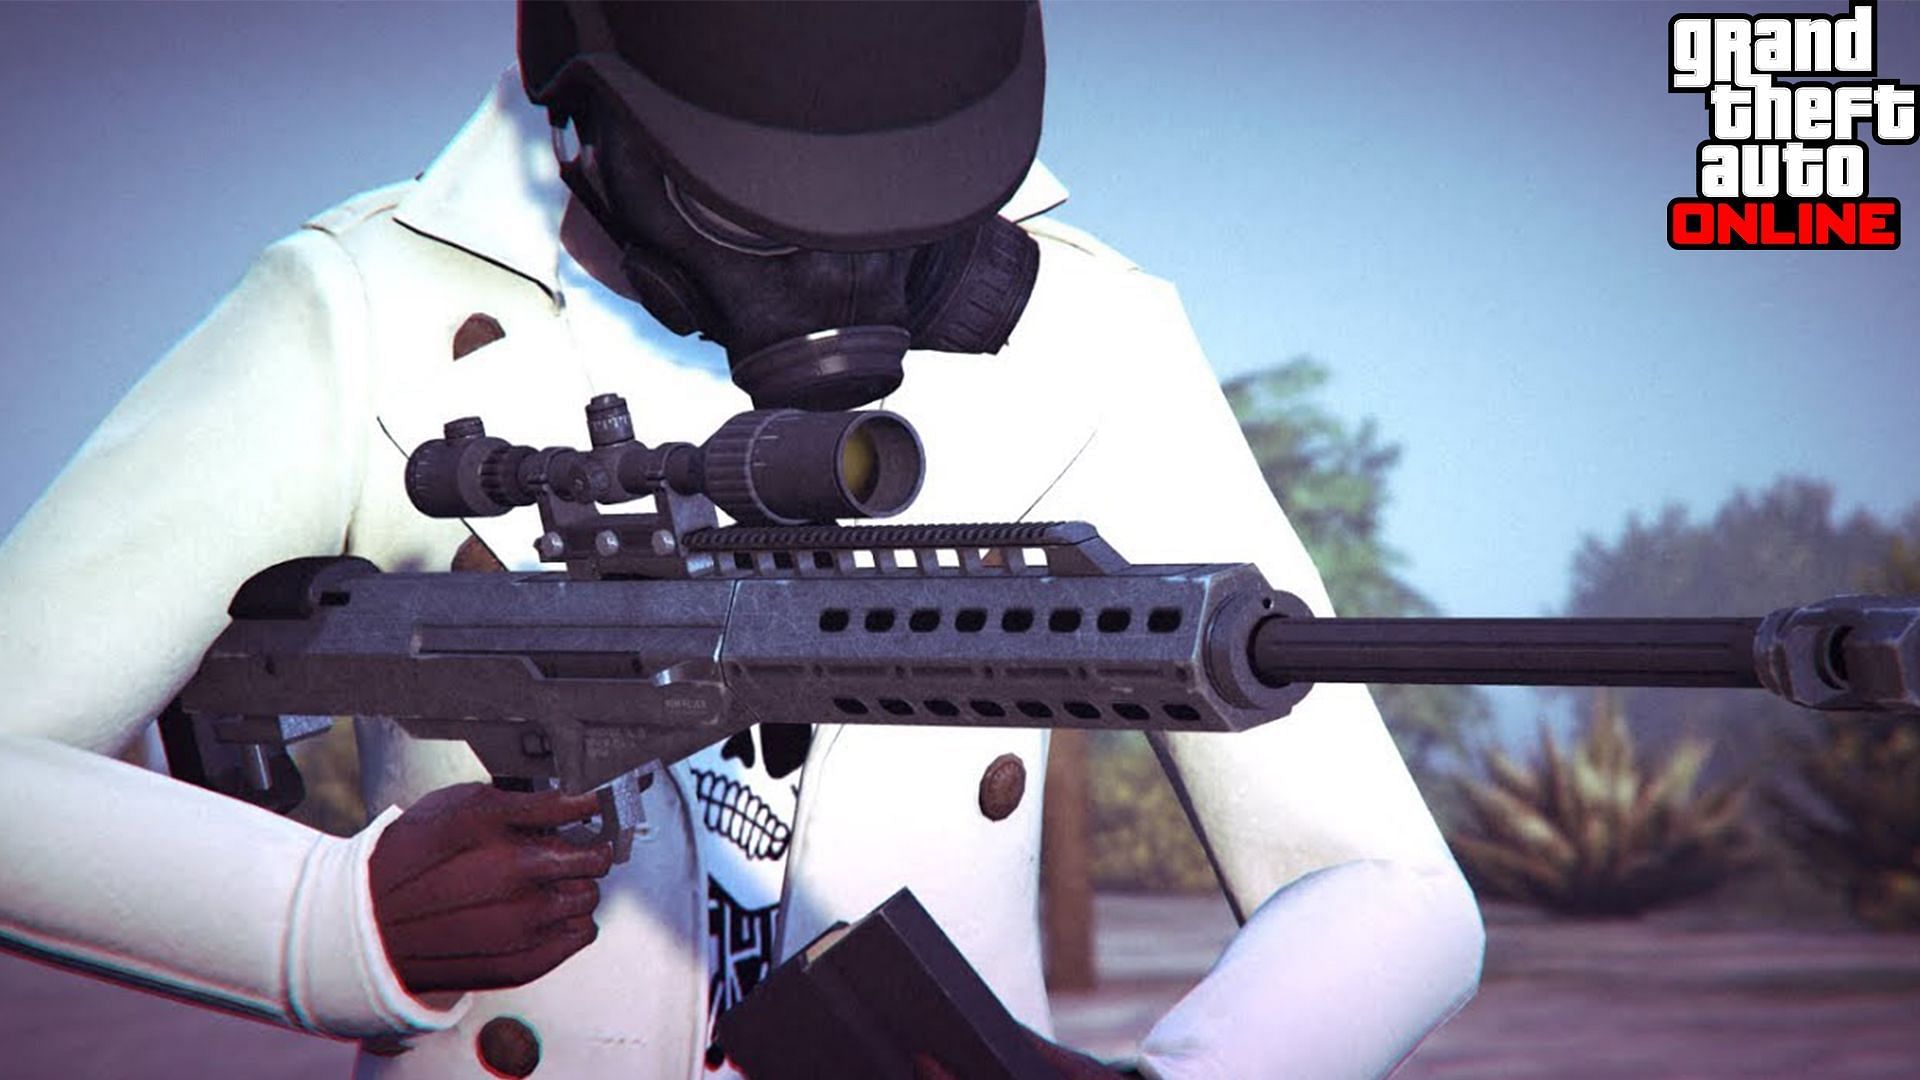 GTA Online&#039;s Heavy Sniper is the ultimate &#039;one shot, one kill&#039; weapon in the game (Image via Sportskeeda)